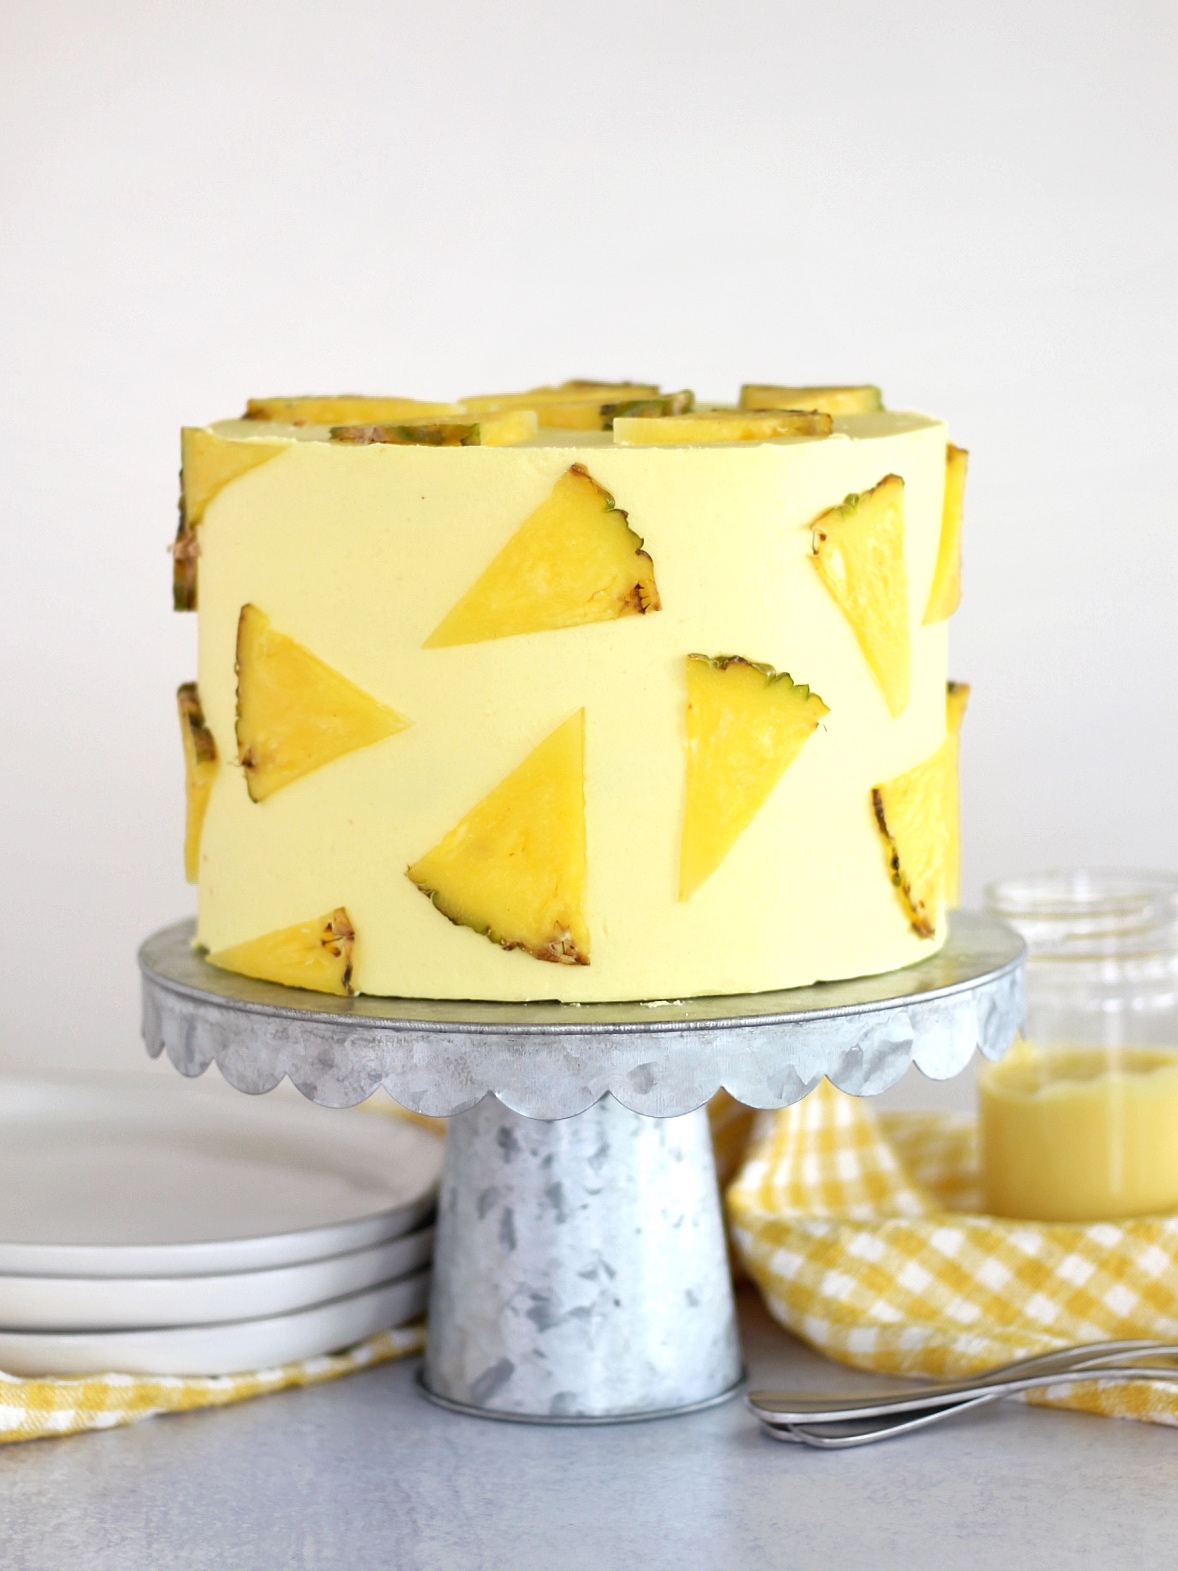 Pineapple Dole Whip Cake - the most delicious pineapple cake inspired by Disney's Dole Whip ice cream. This Pineapple Dole Whip Cake is filled with layers of pineapple cake, pineapple curd and pineapple buttercream #cakebycourtney #cake #pineapplecake #pineapplebuttercream #howtomakecake #summercake #pineapple #summerdessert #pineapplecakerecipe #cakerecipe #homemadeicing #homemadecake #howto makebuttercreamfrosting #frostingrecipe #buttercreamrecipe